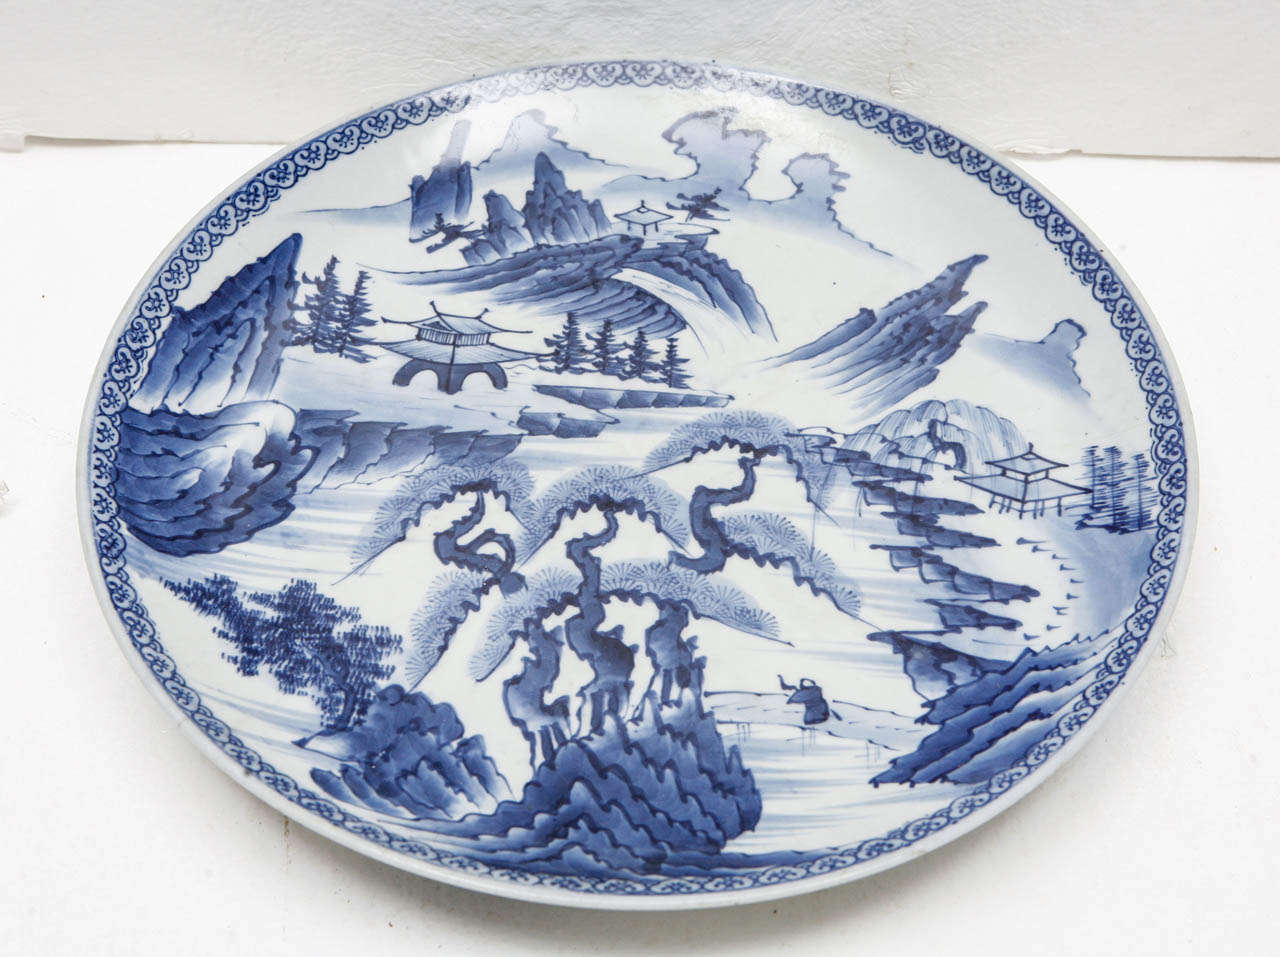 Vintage blue & white hand painted charger with landscape of mountains, trees, houses and clouds.
Perfect, no cracks or chips.